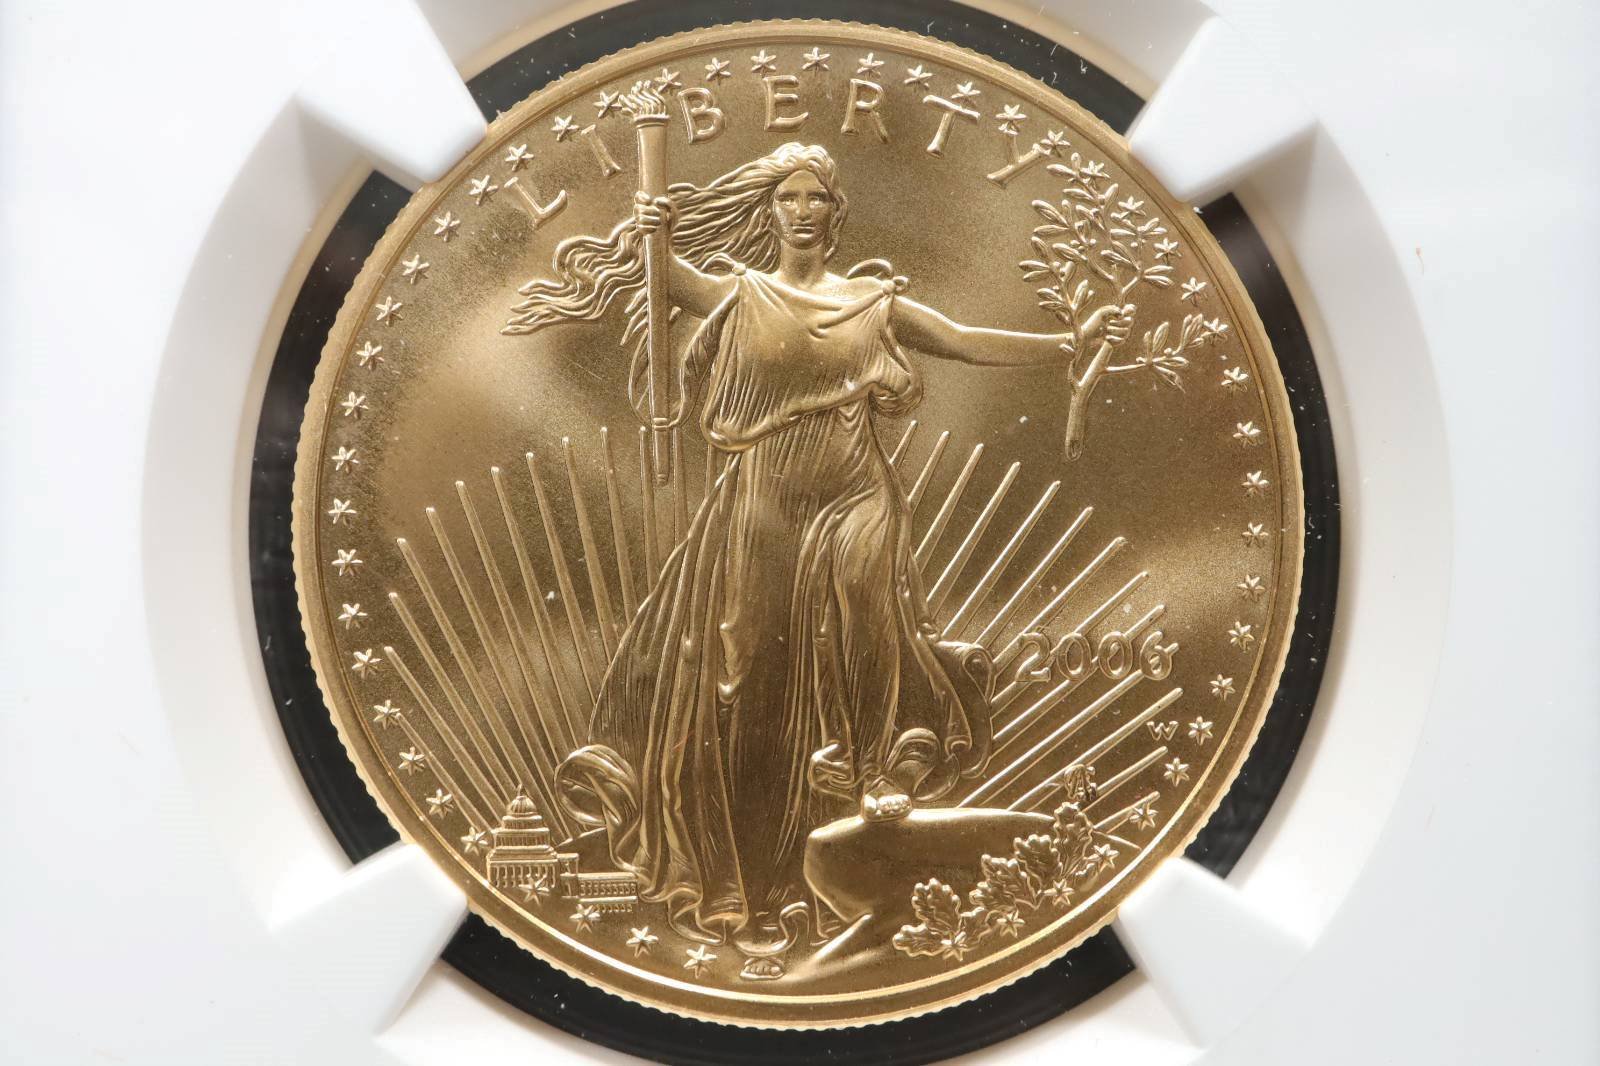 Featured item of the day, from our gold coin sale!

GOLD 2006-W $50 NGC Ms70 BURNISHED American Gold Eagle

Auction ends: Saturday, May 11th at 6:16pm EST

View the auction and bid: https://www.ebay.com/itm/386974462492